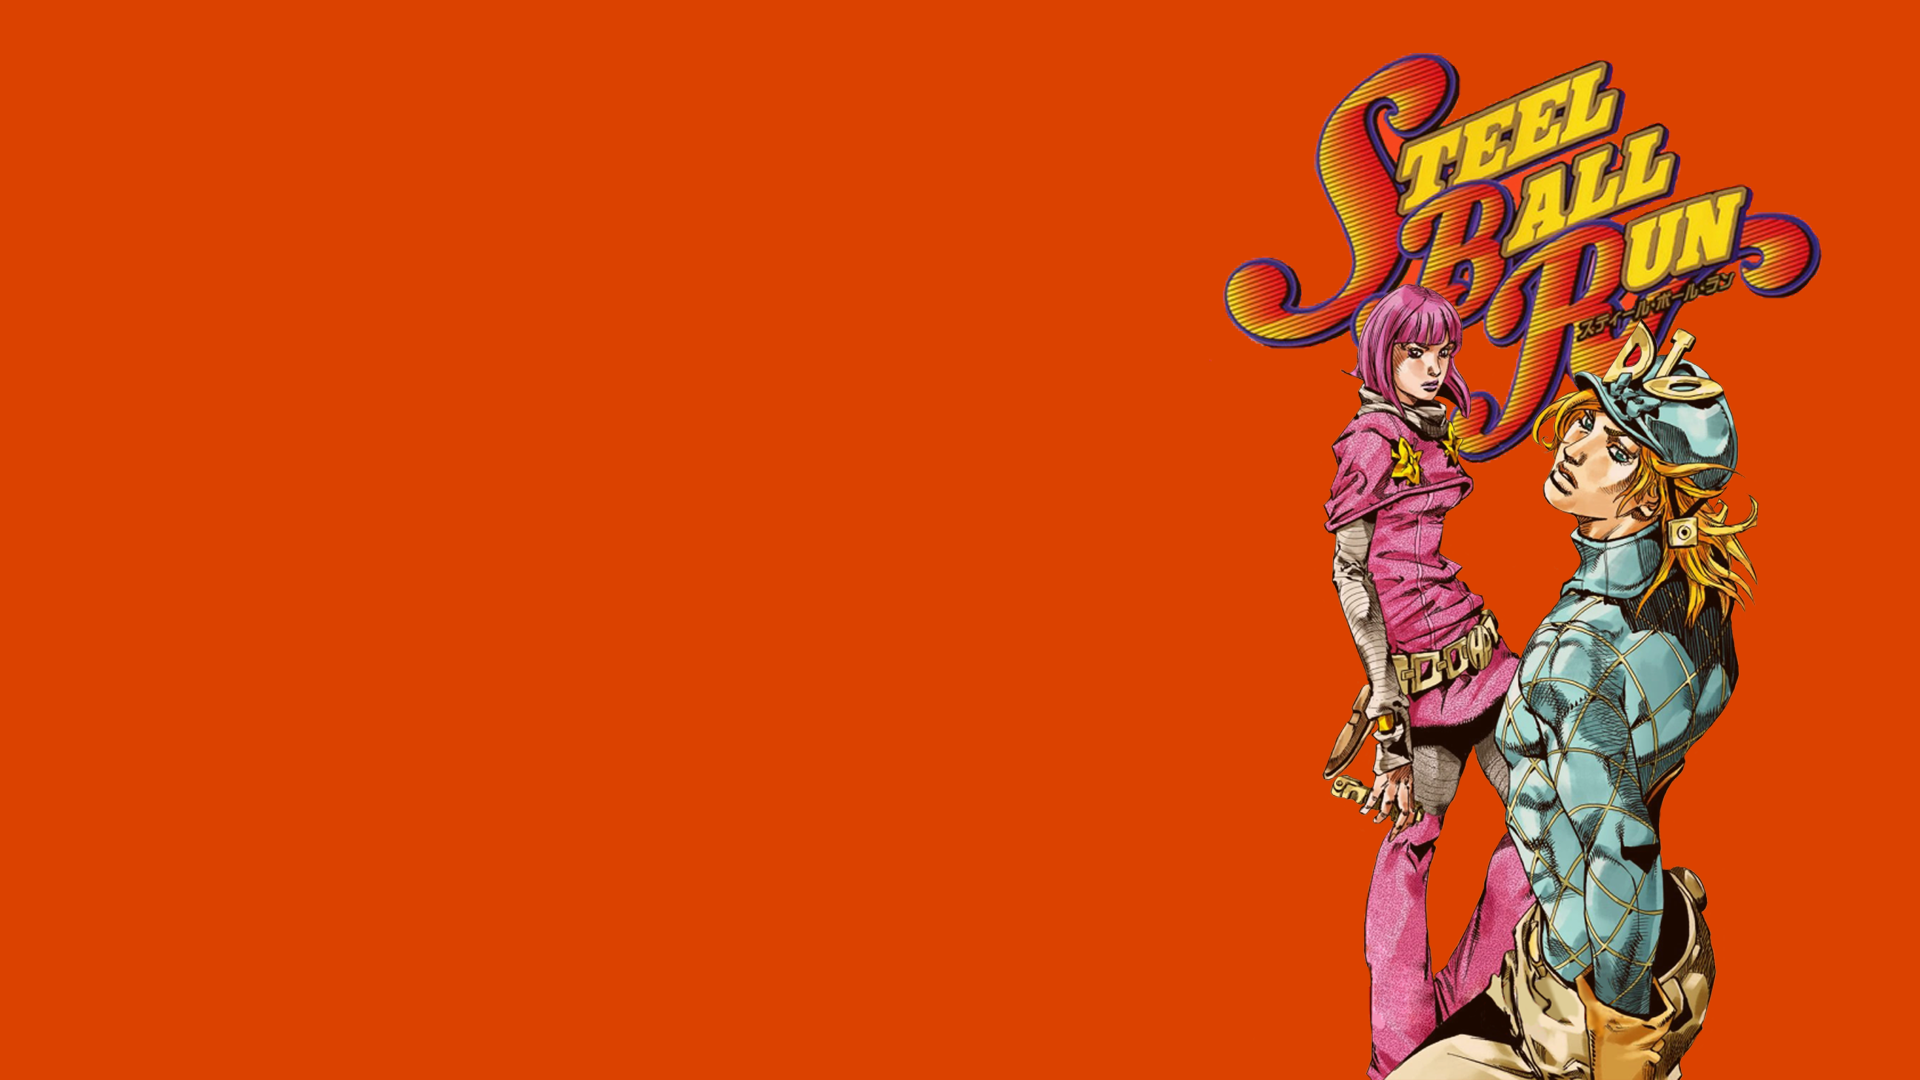 Just finished the amazing part 7. Decided to make a simple wallpaper!